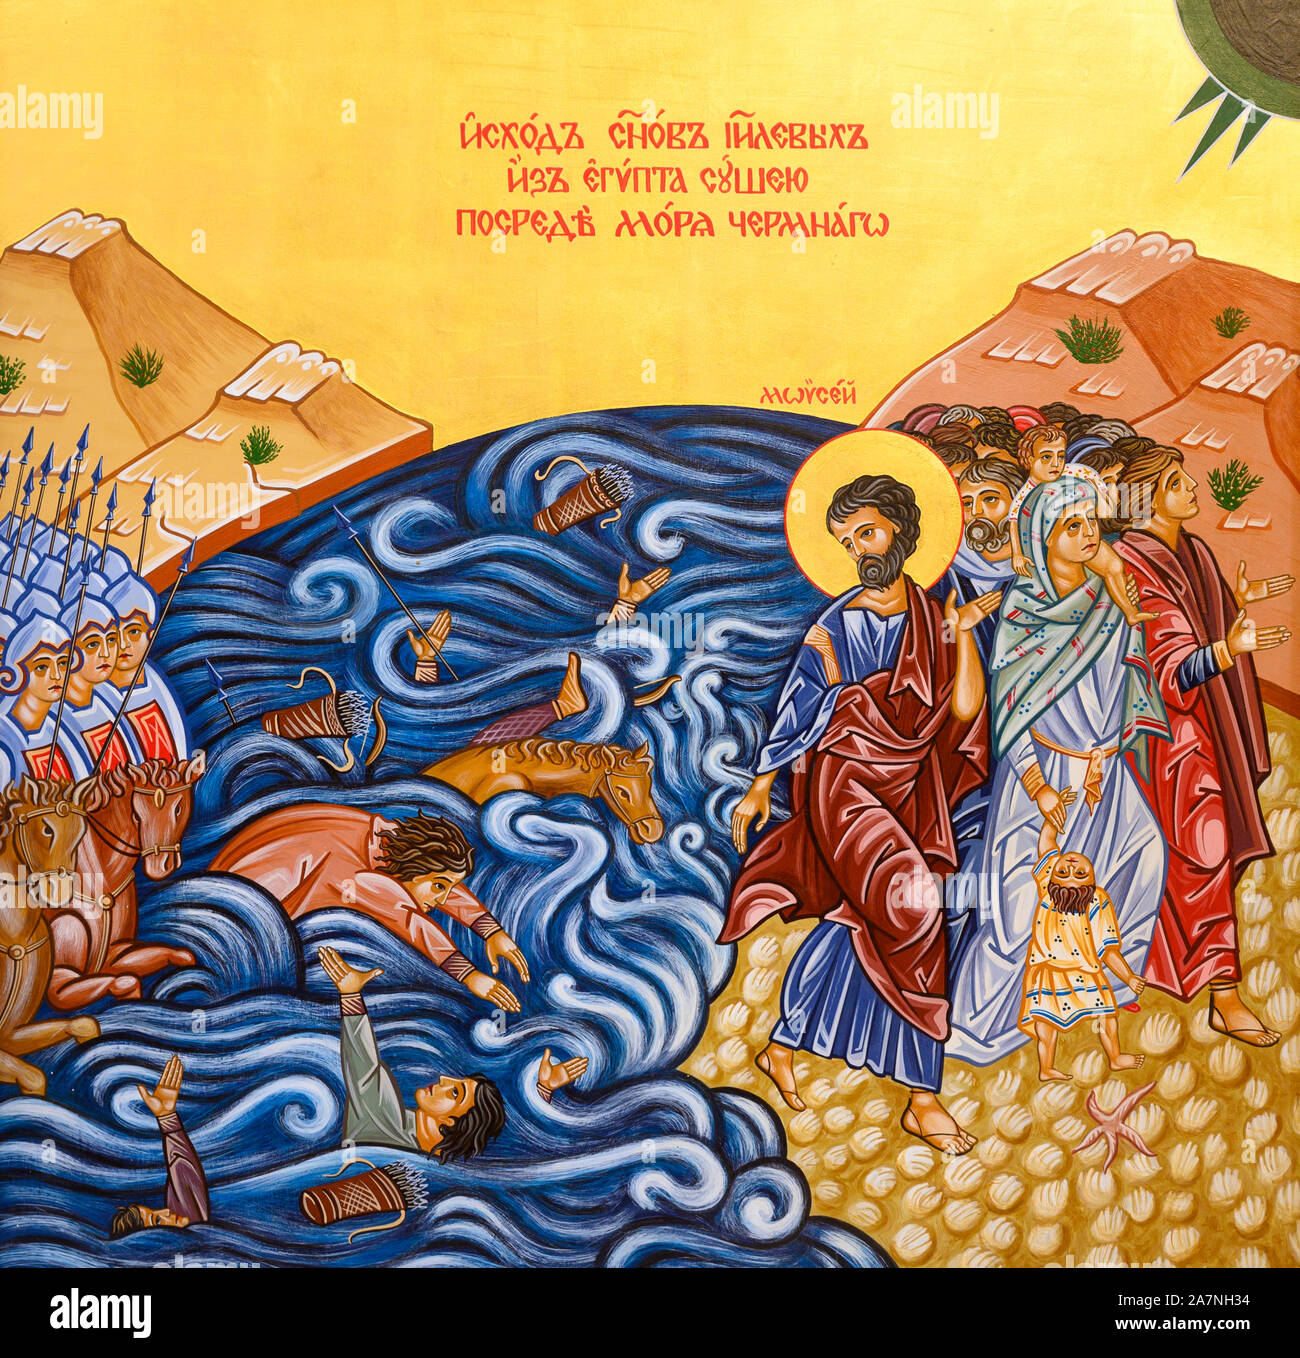 Icon of the Crossing of the Red Sea – Moses leading Israelites through the Sea of Reeds. The Greek Catholic church in Bratislava, Slovakia. Stock Photo